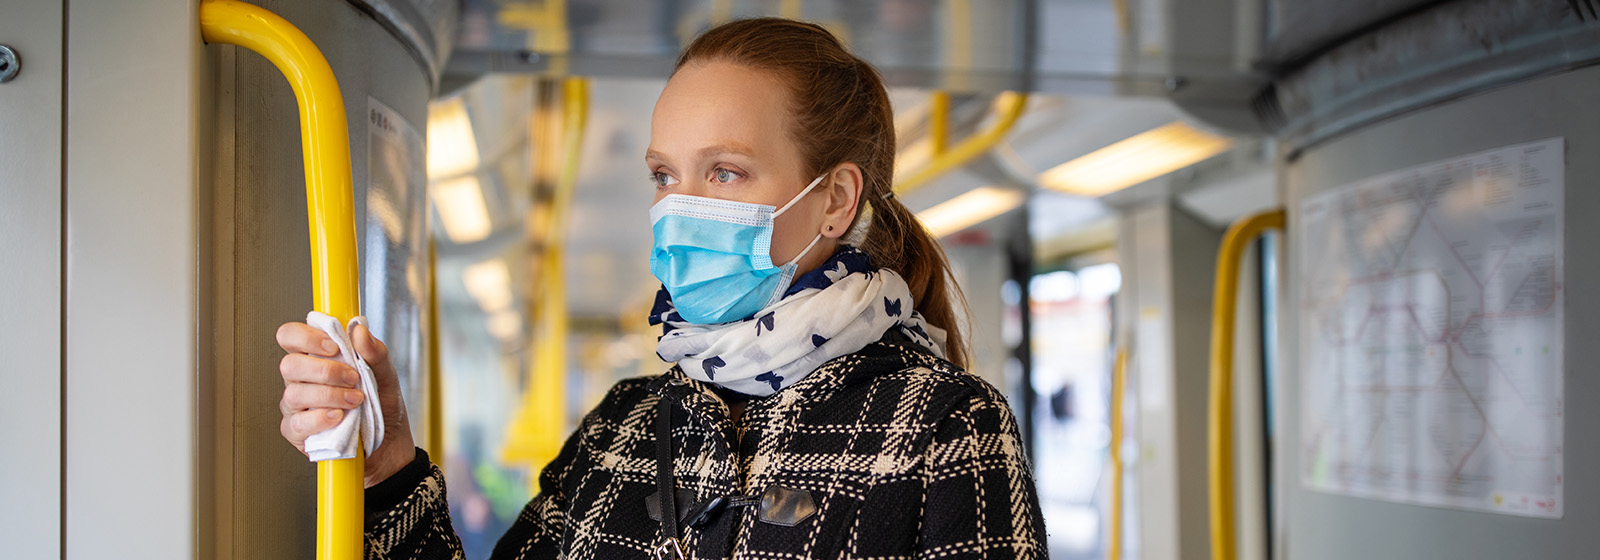 woman with face mask standing on the bus